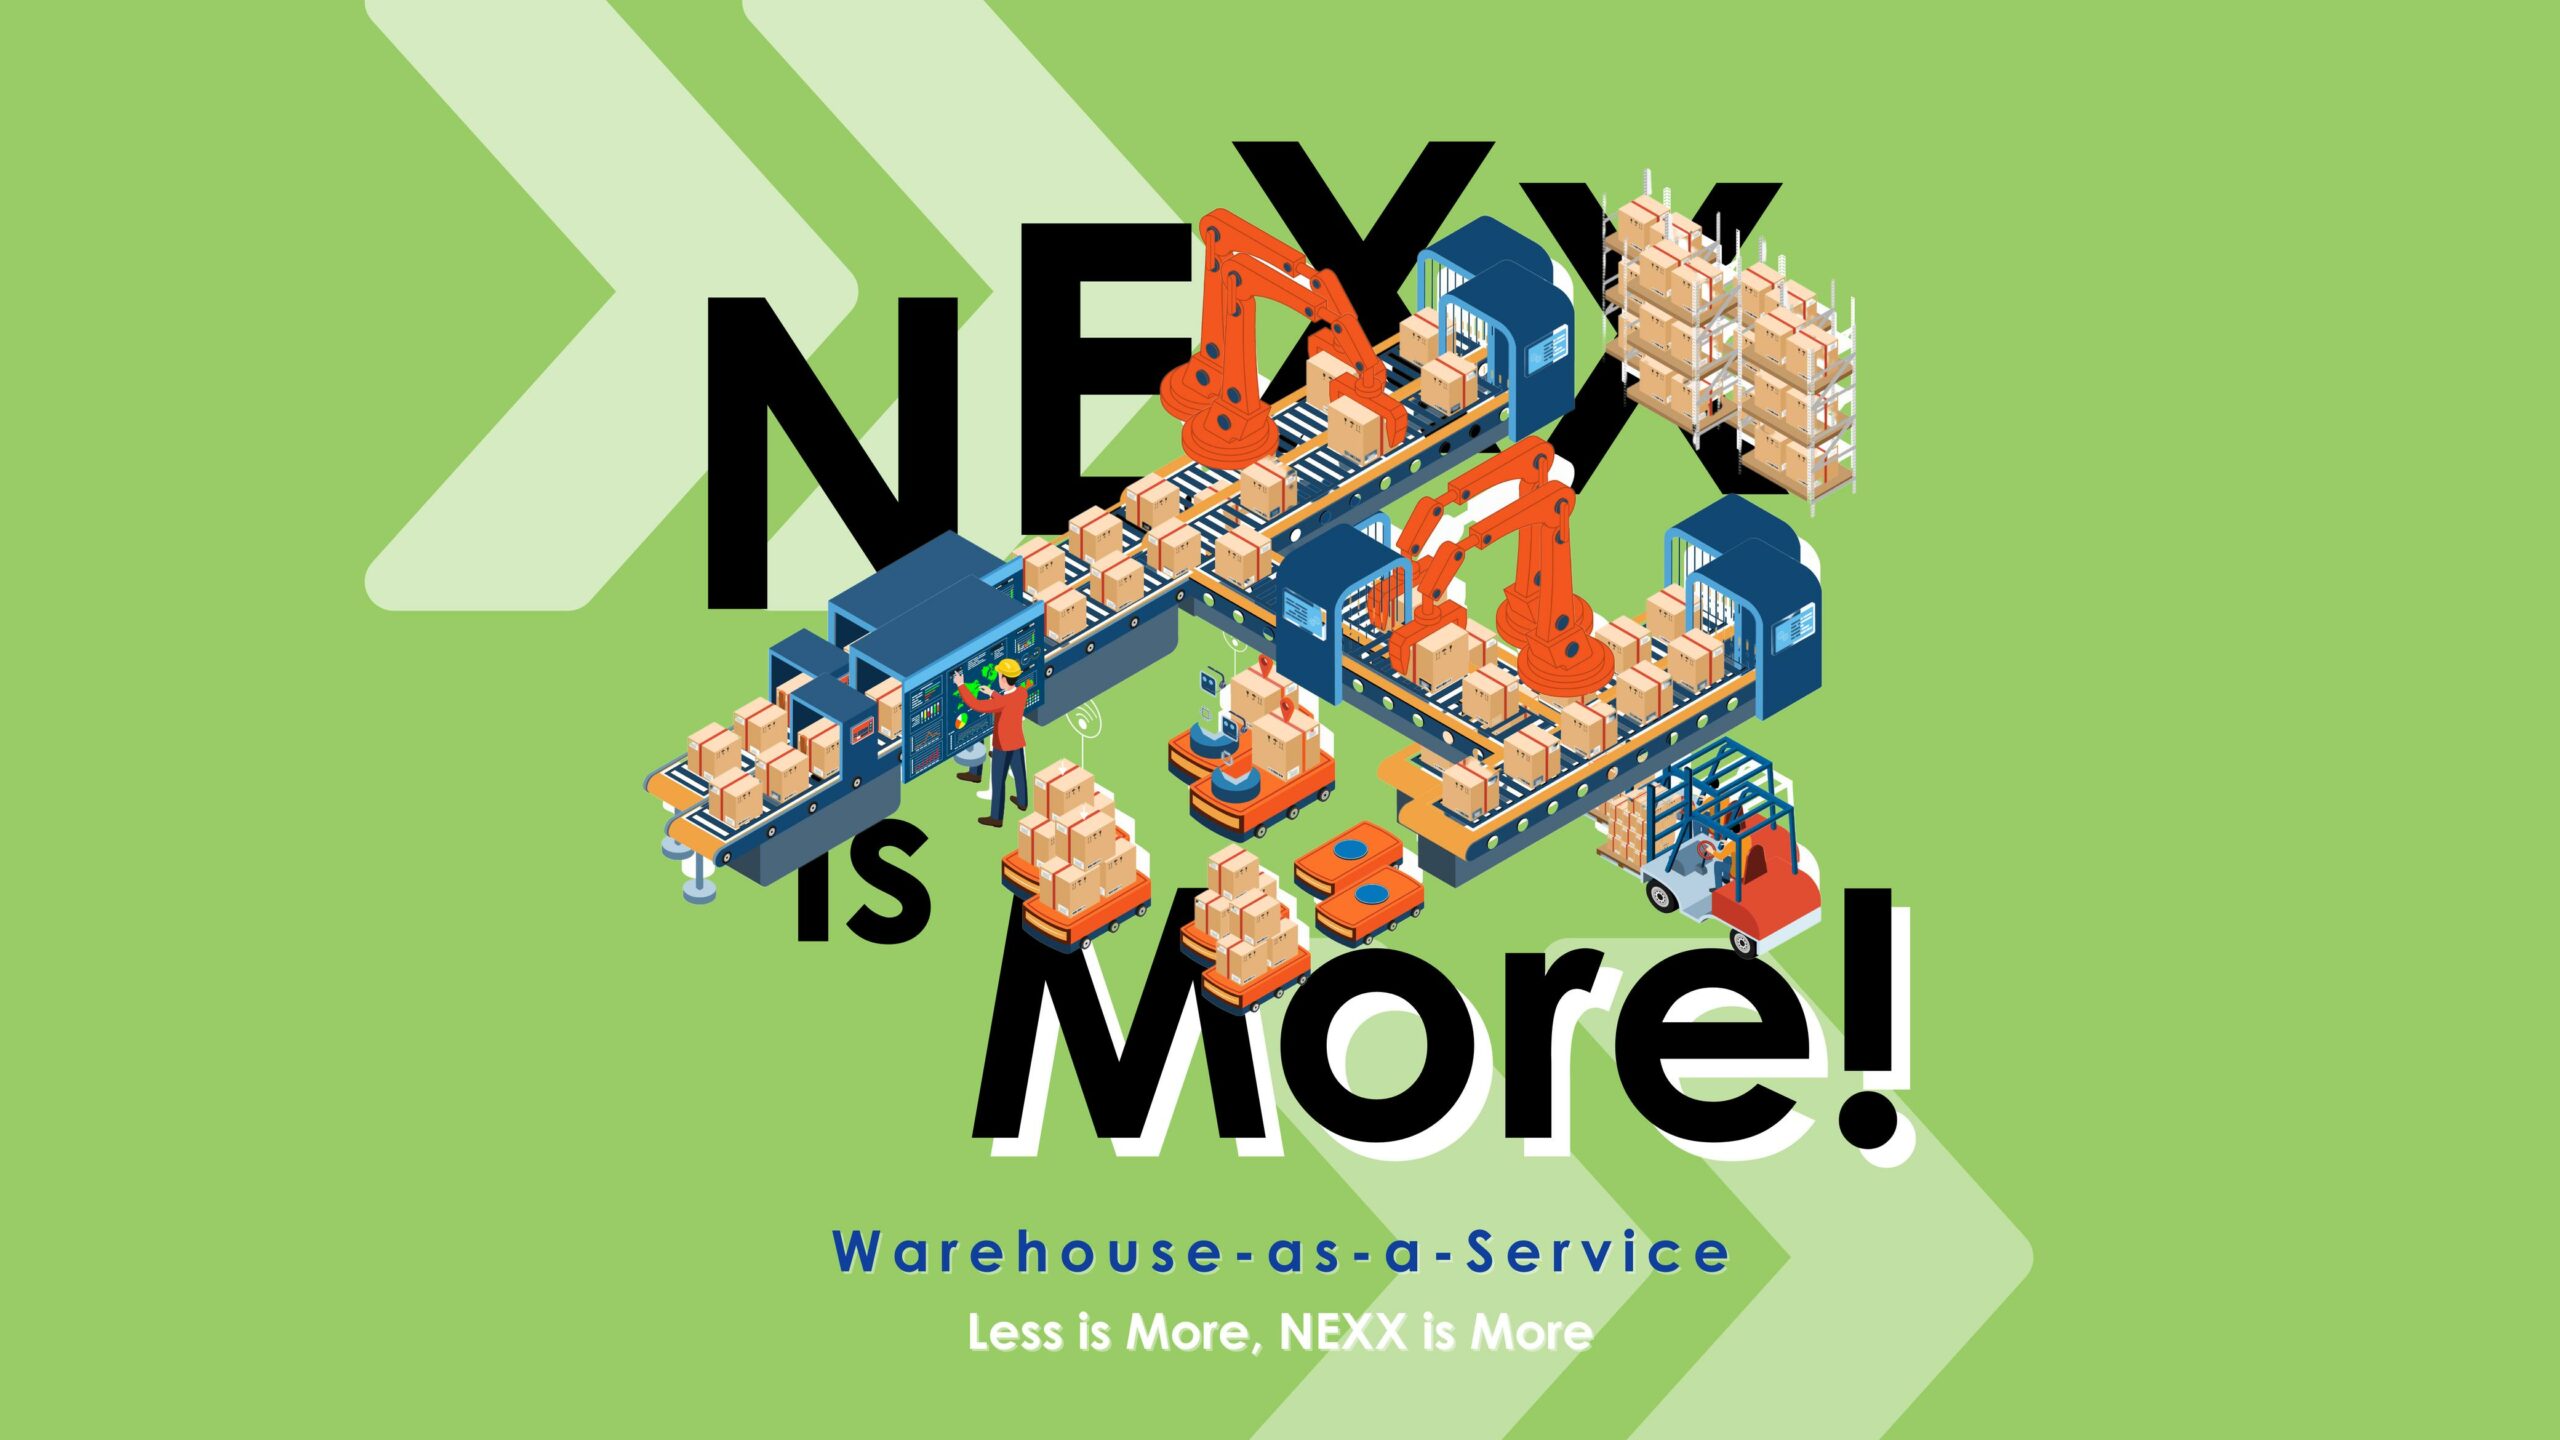 Less is More, NEXX is more!